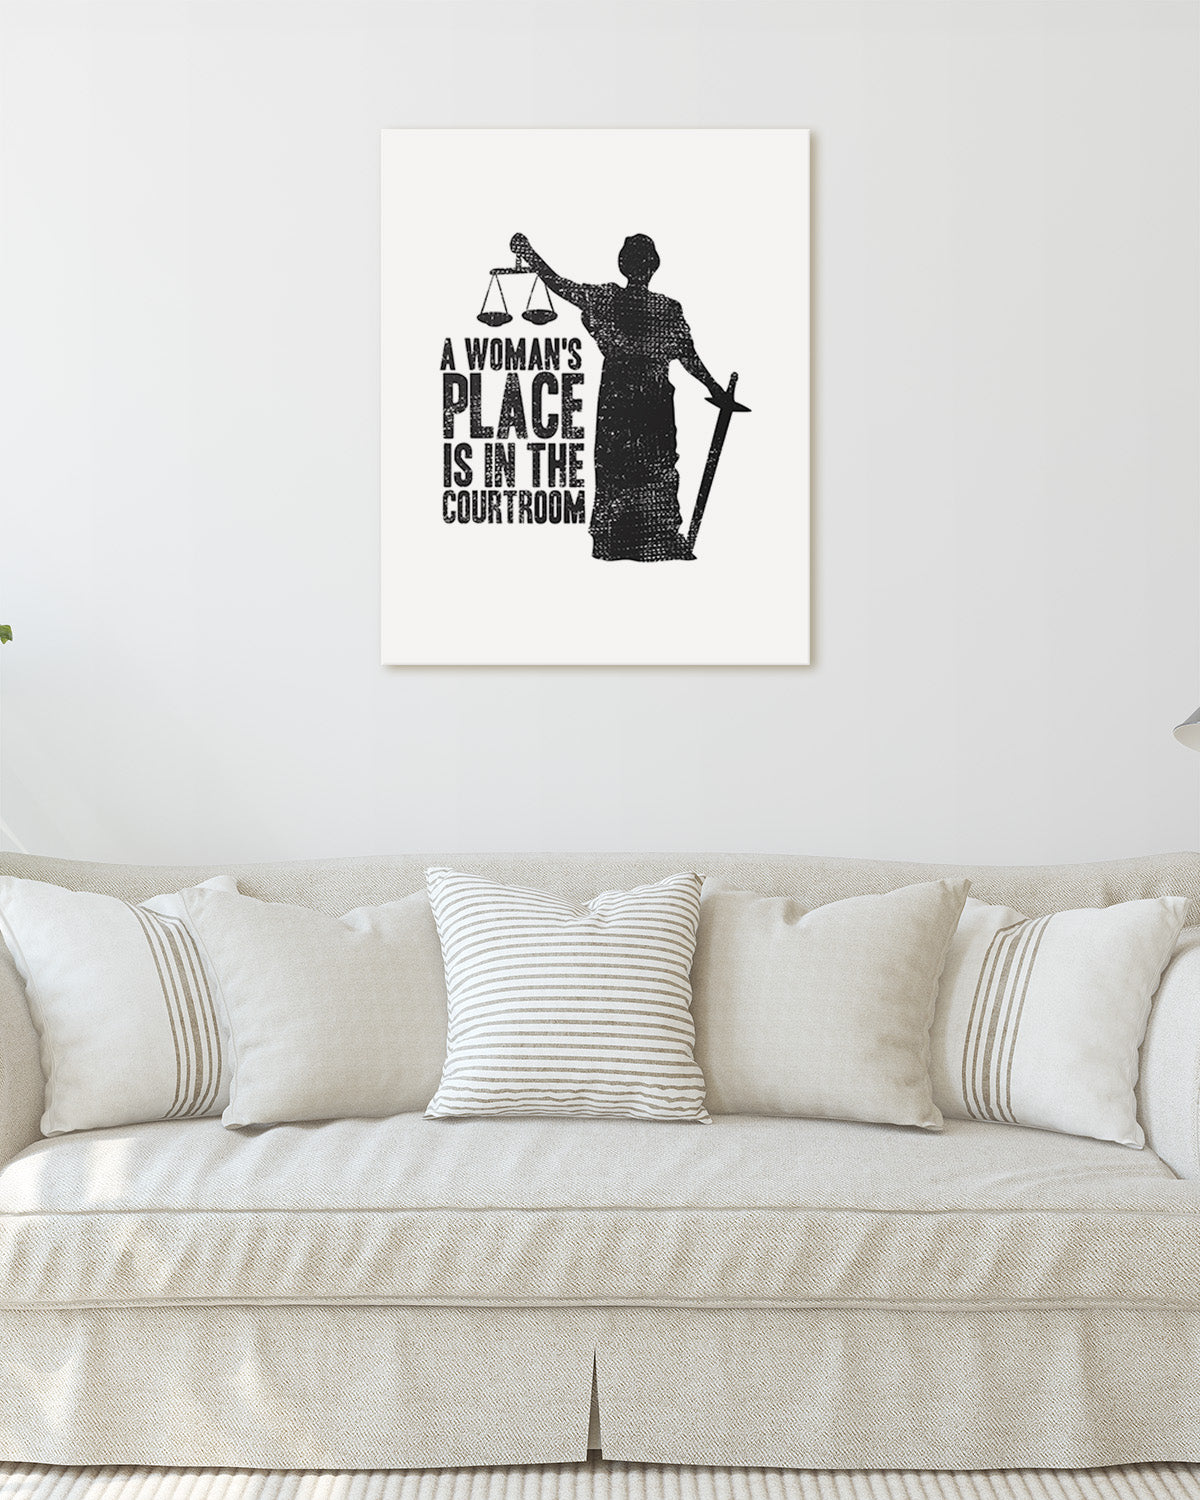 Ruth Bader Ginsburg Wall Art - RBG Inspirational Room Decor - Positive Quote for Attorney, Liberal Feminist, Law School Student or Graduate - Lawyer Gifts for Women